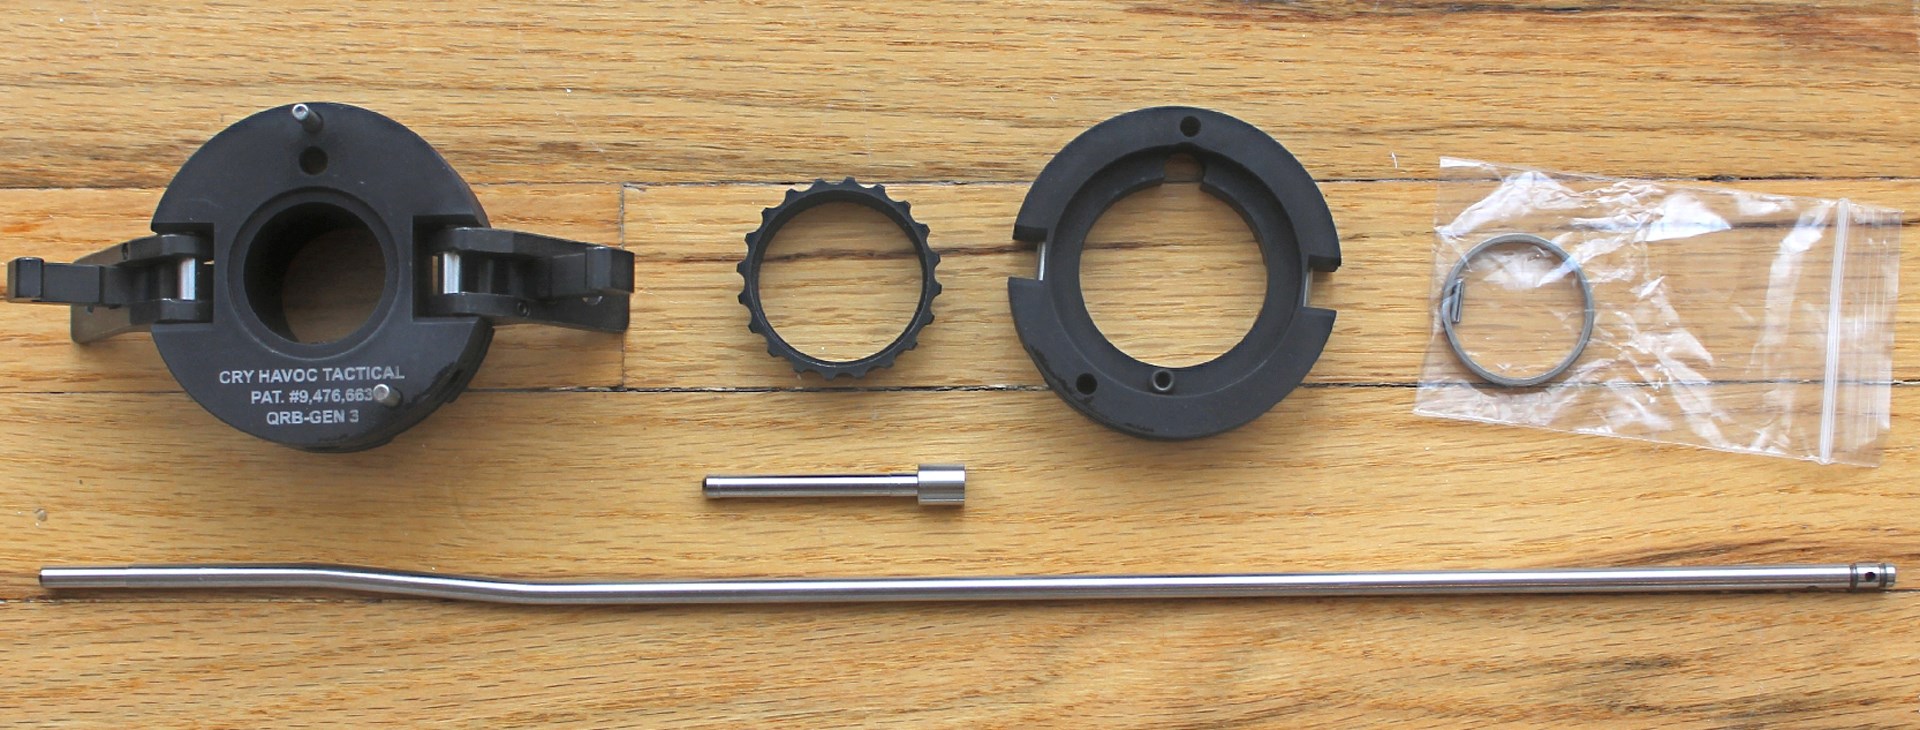 CRY HAVOC TACTICAL QRB parts arrangement on wood gun rifle quick disconnect barrel system rings gas tube